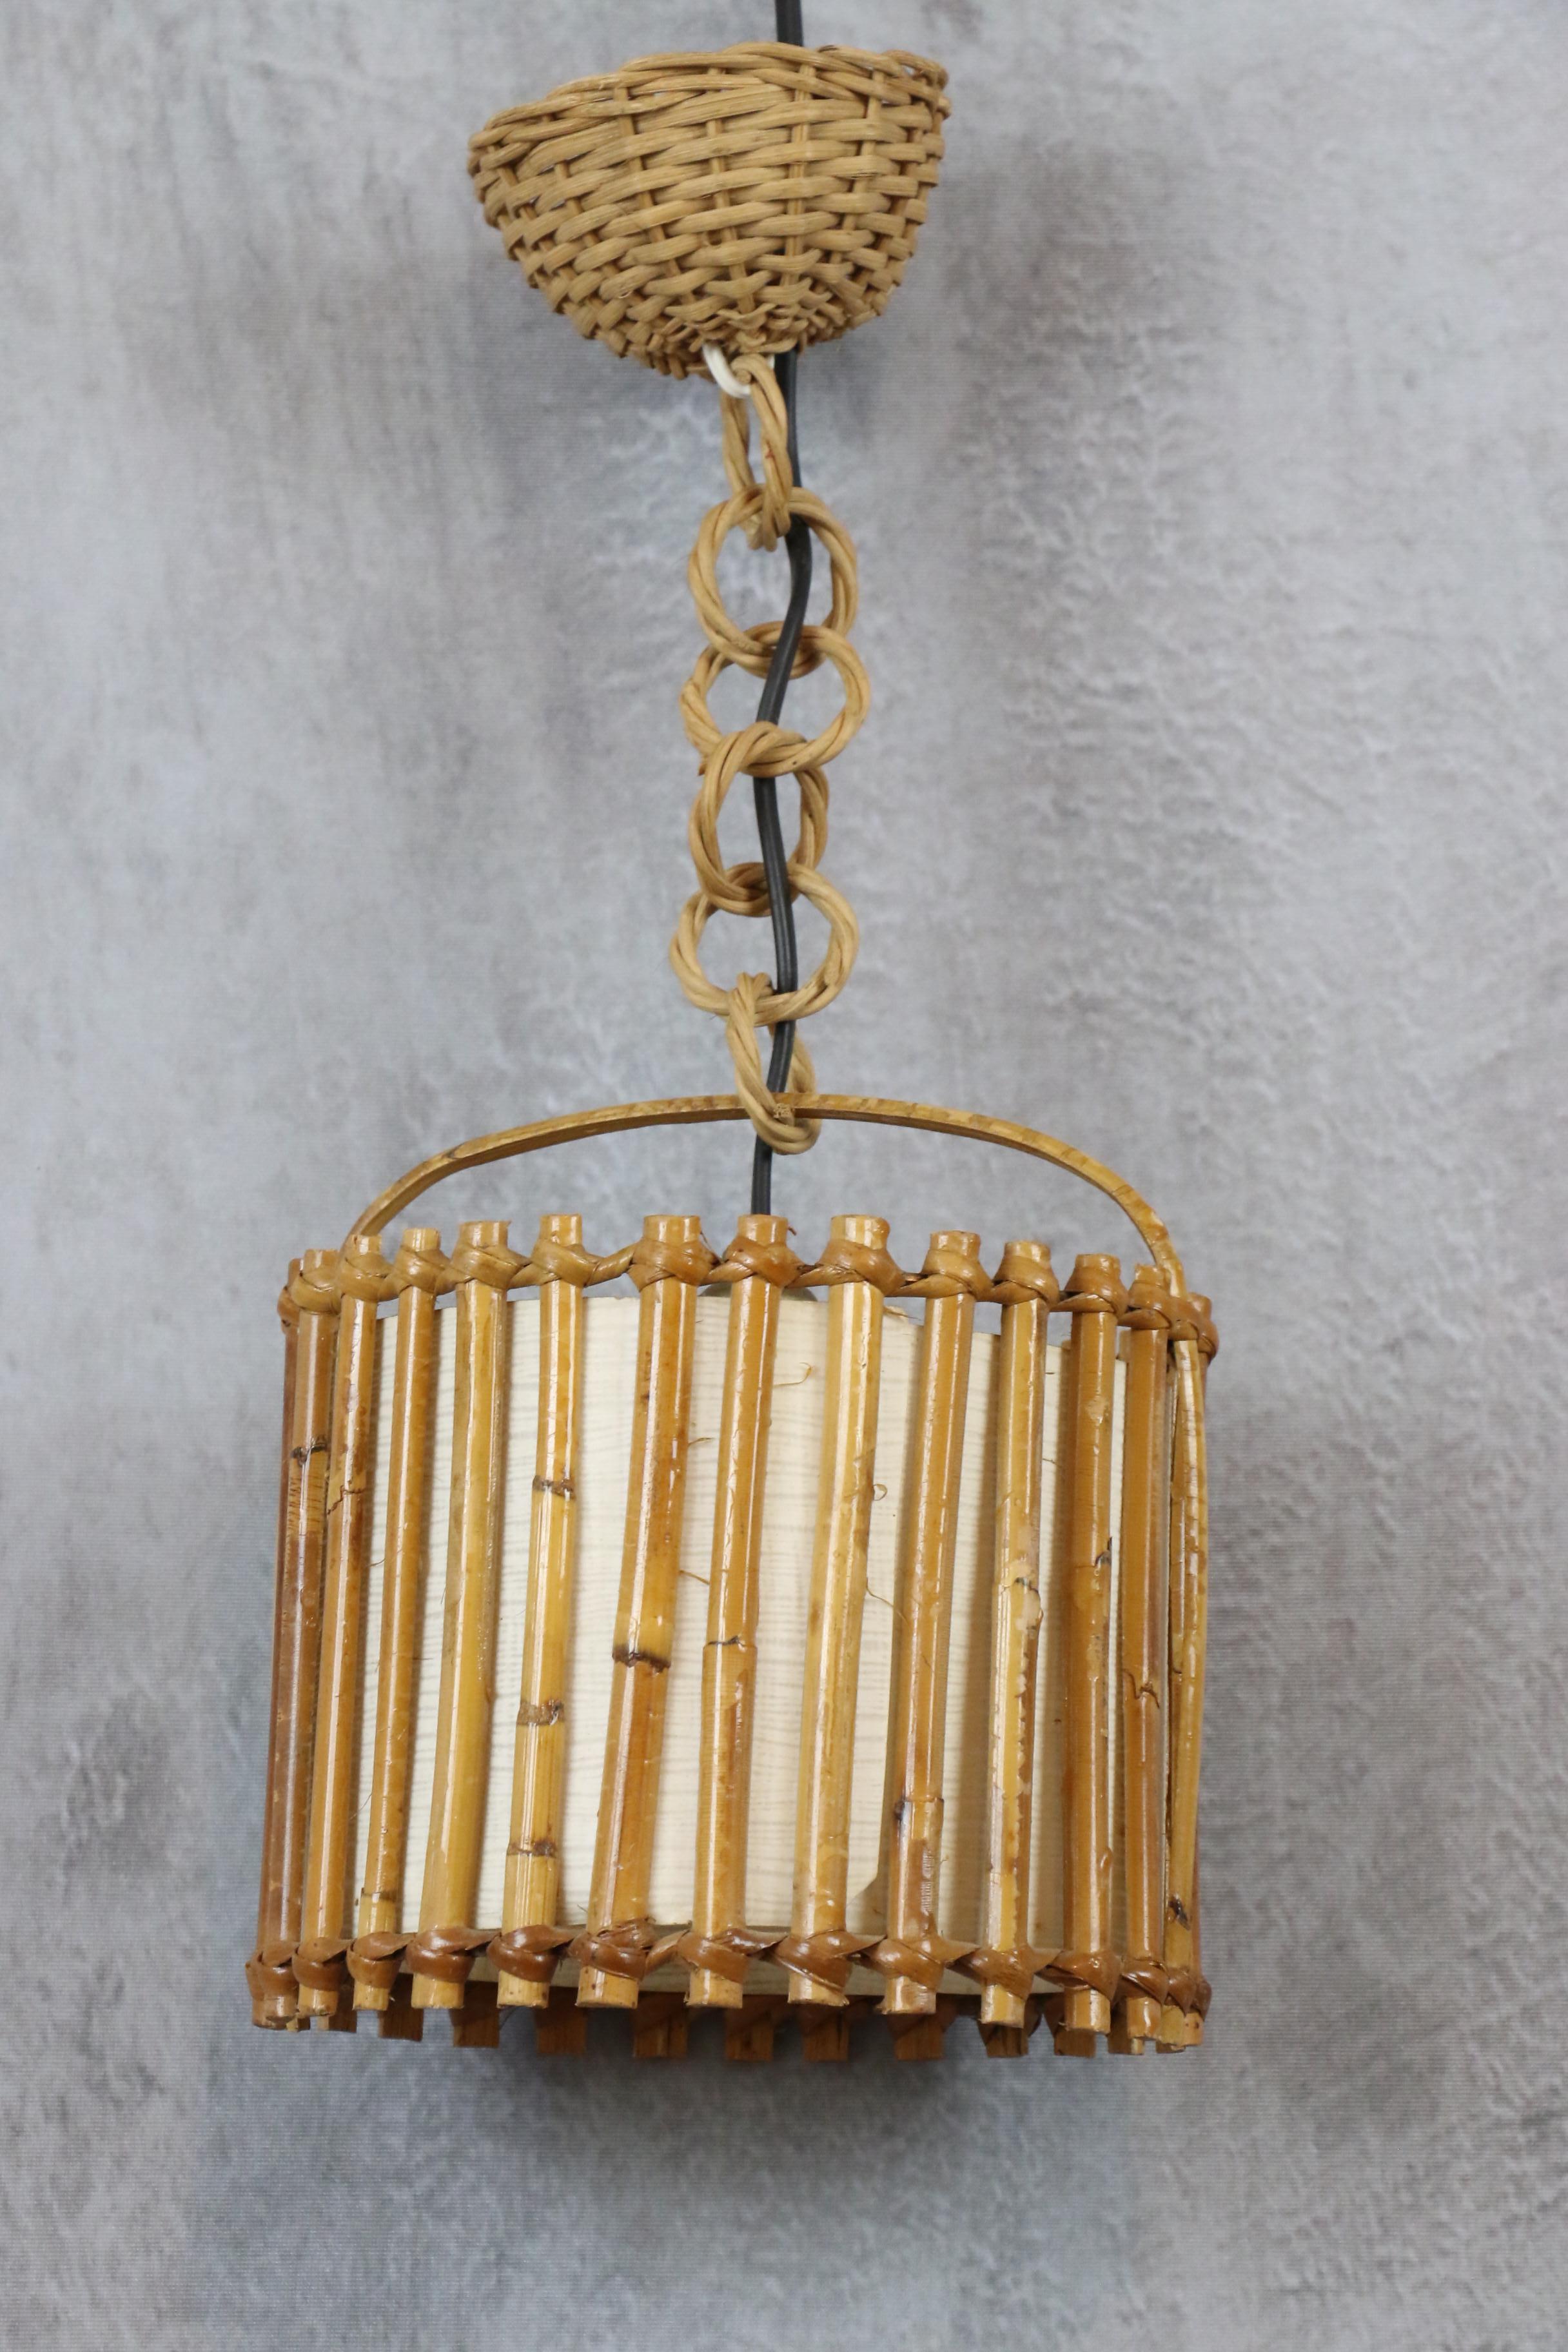 Louis Sognot Bamboo and Rattan Chandelier Mid Century Modern 1960, France

This lantern features a beautiful design with a spherical rattan structure.
It has a paper shade inside to diffuse a soft, warm light. It is suspended from a rattan link